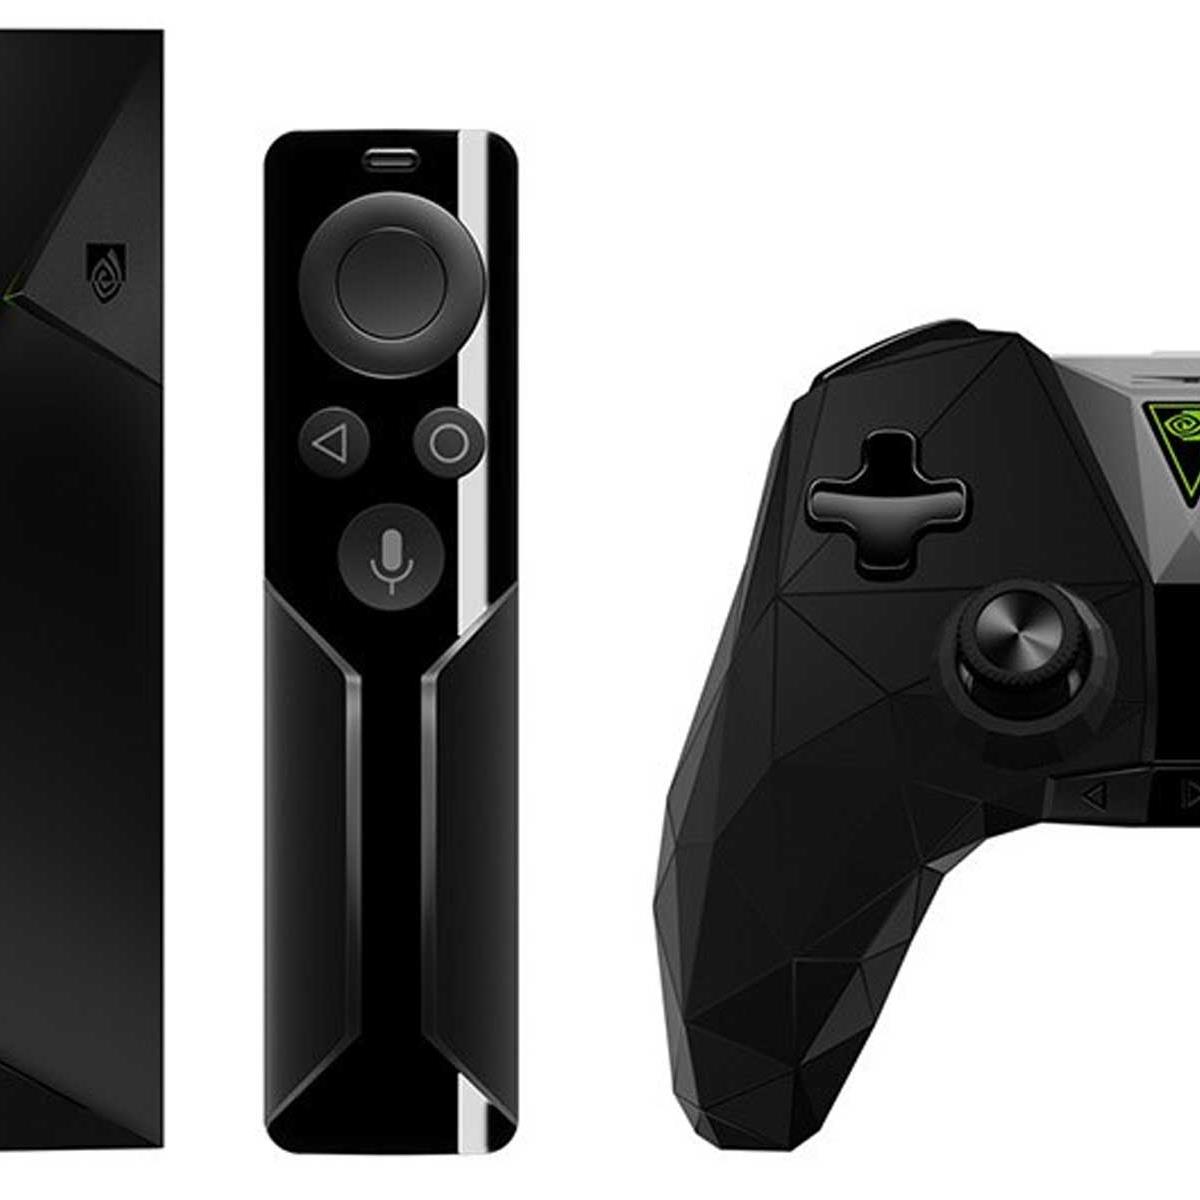 Nvidia SHIELD TV Gets Android Pie Update